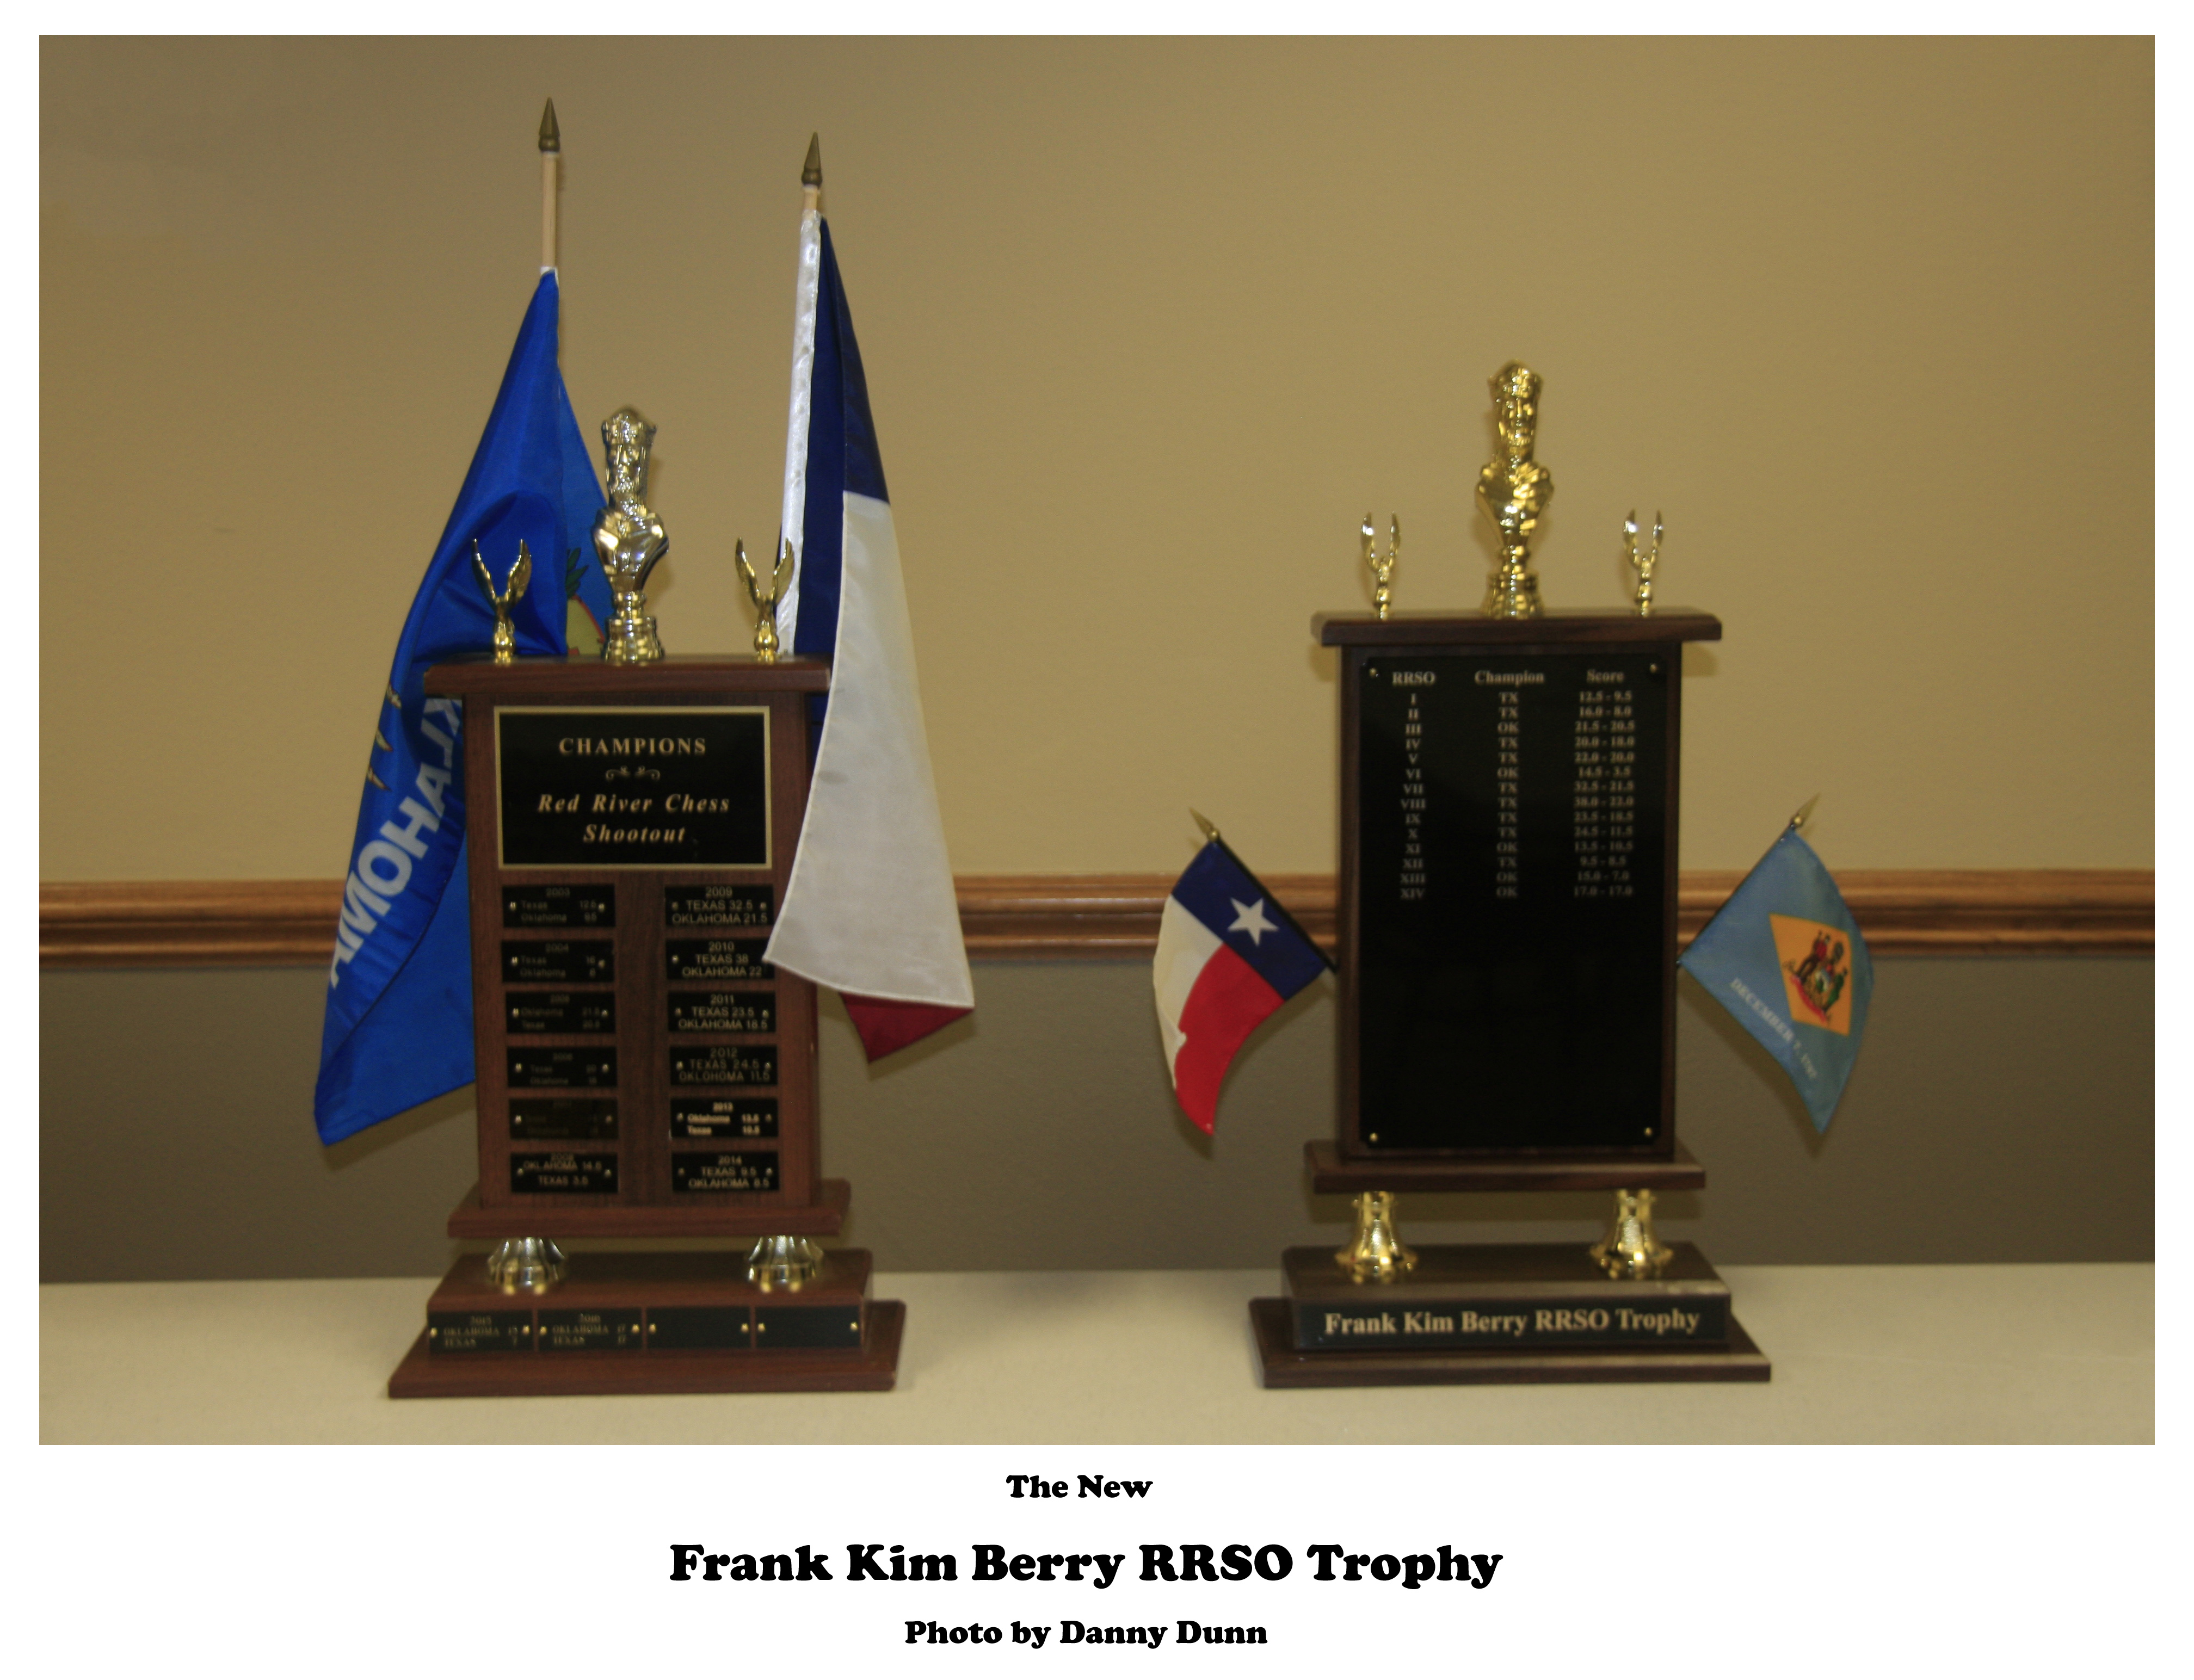 PHOTO OF THE NEW FRANK KIM BERRY RRSO TROPHY